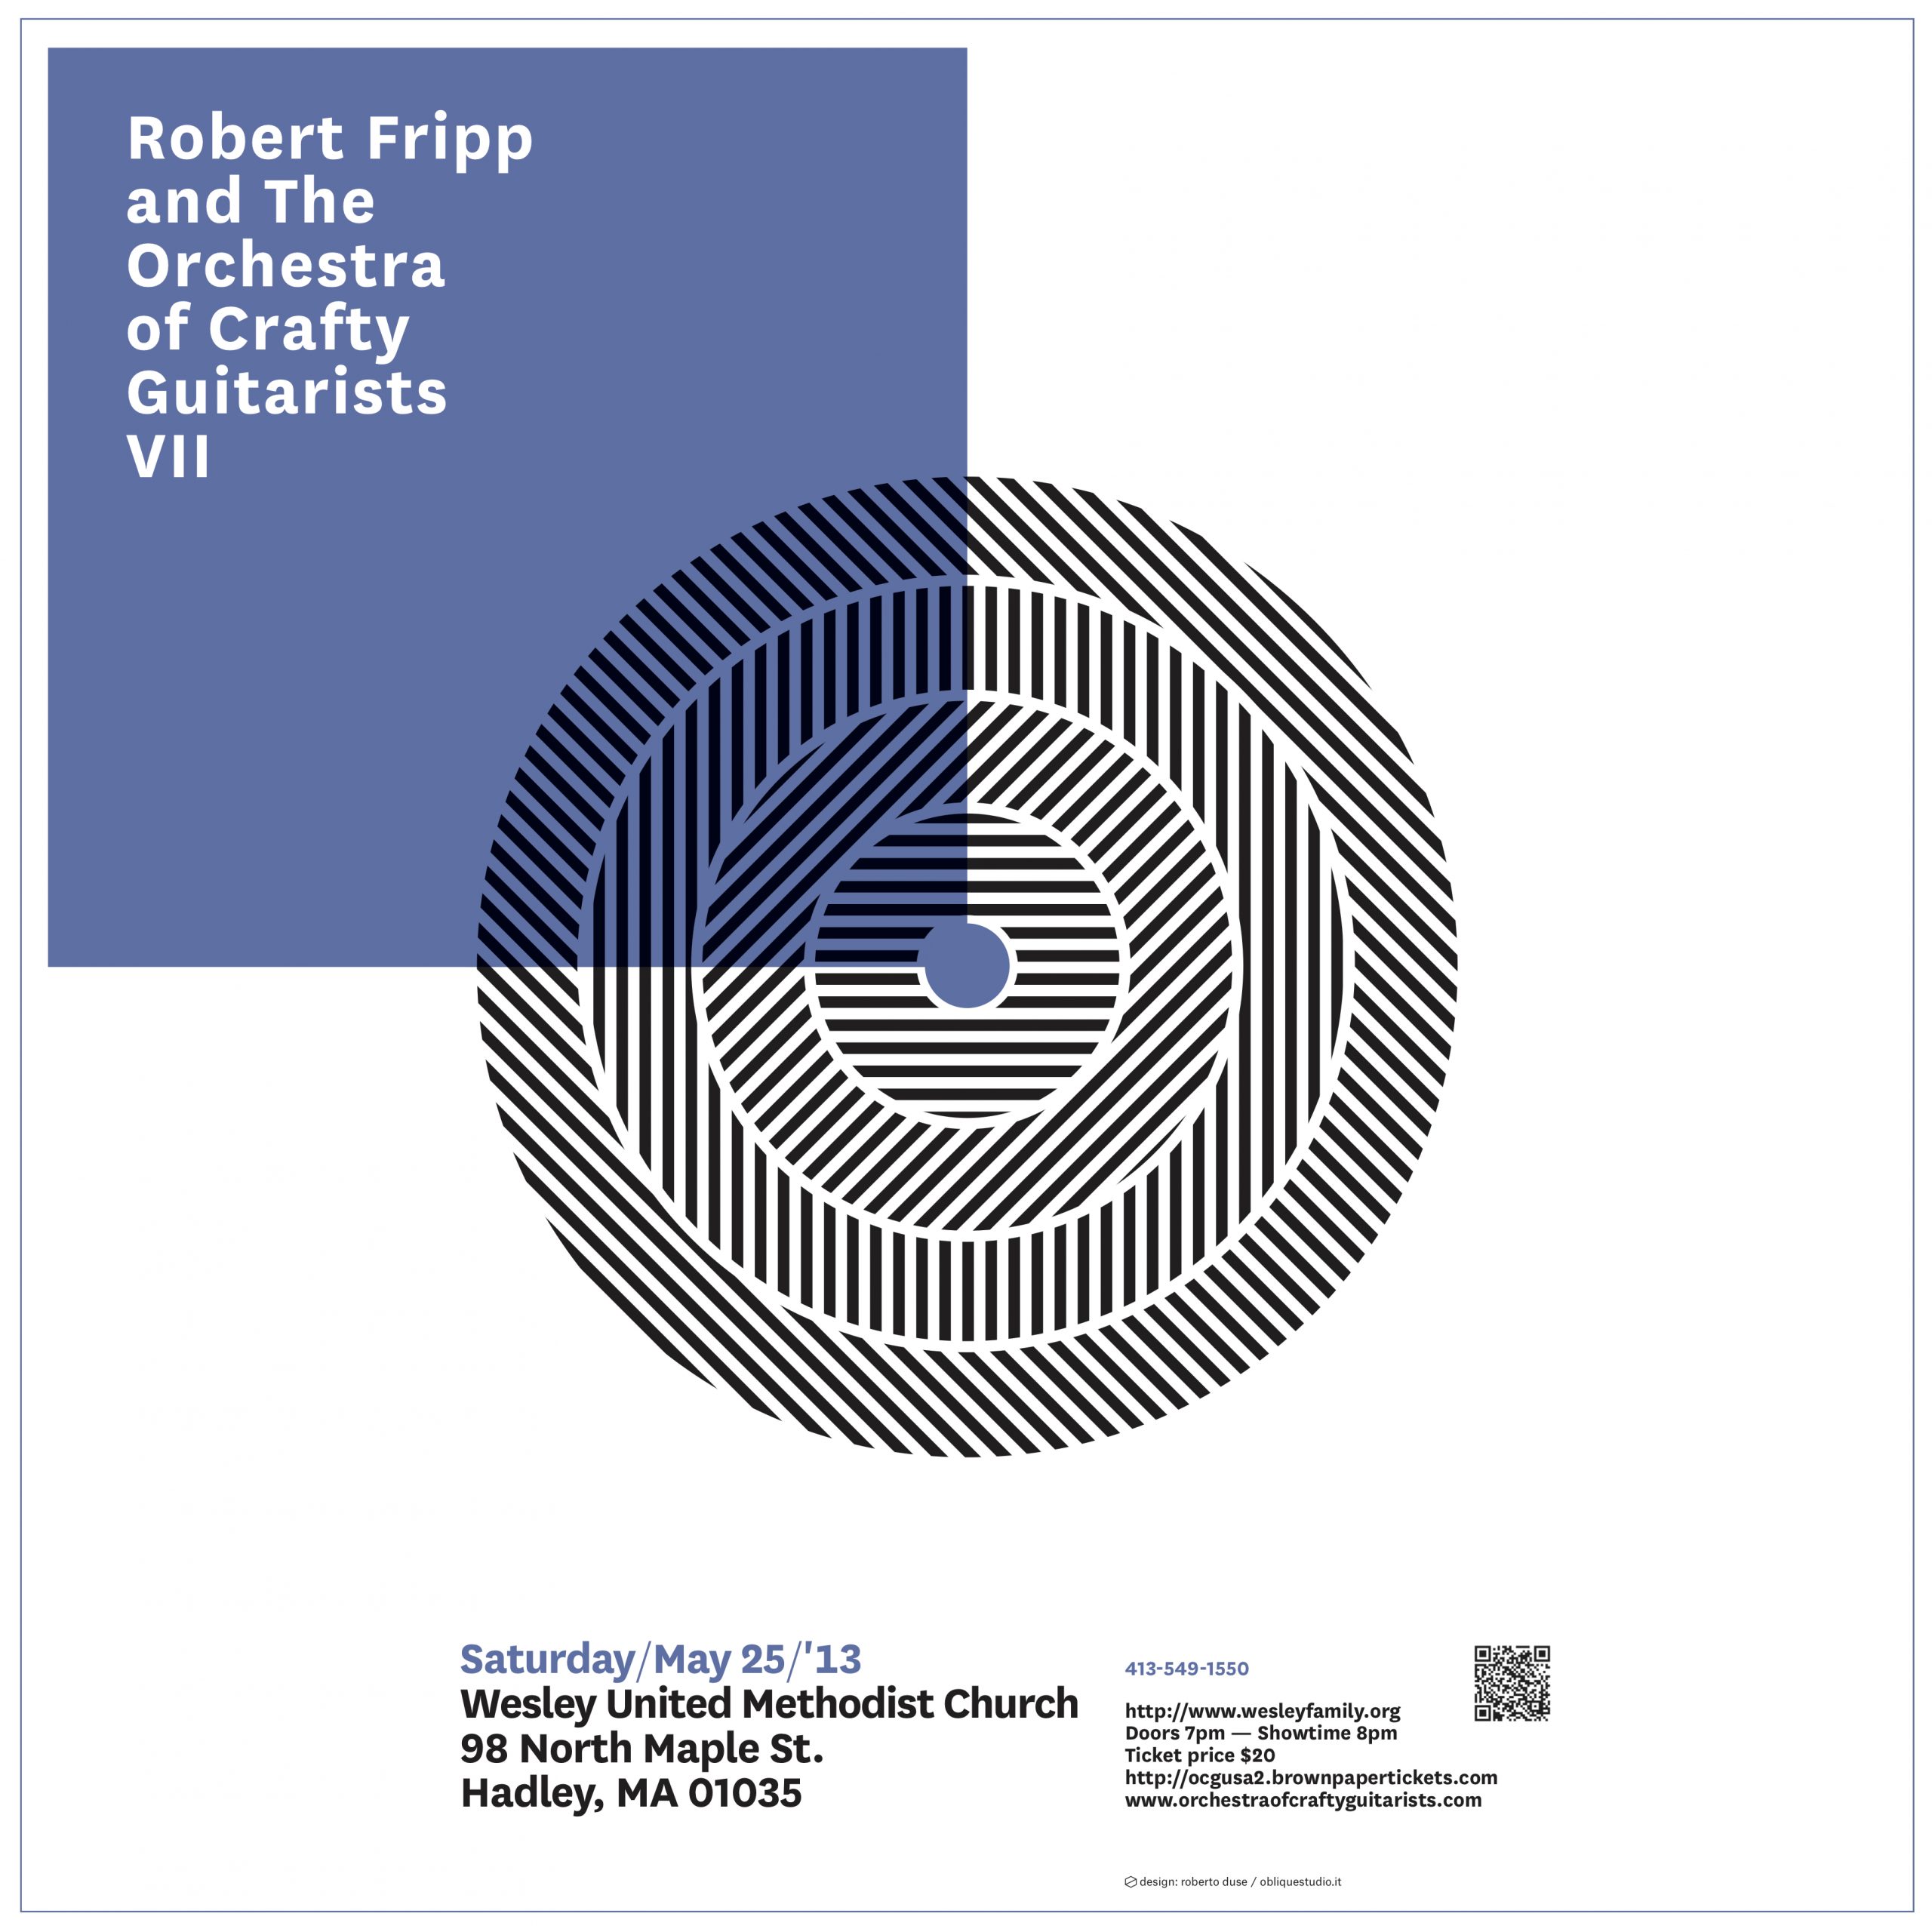 Robert Fripp & The Orchestra Of Crafty Guitarists VII